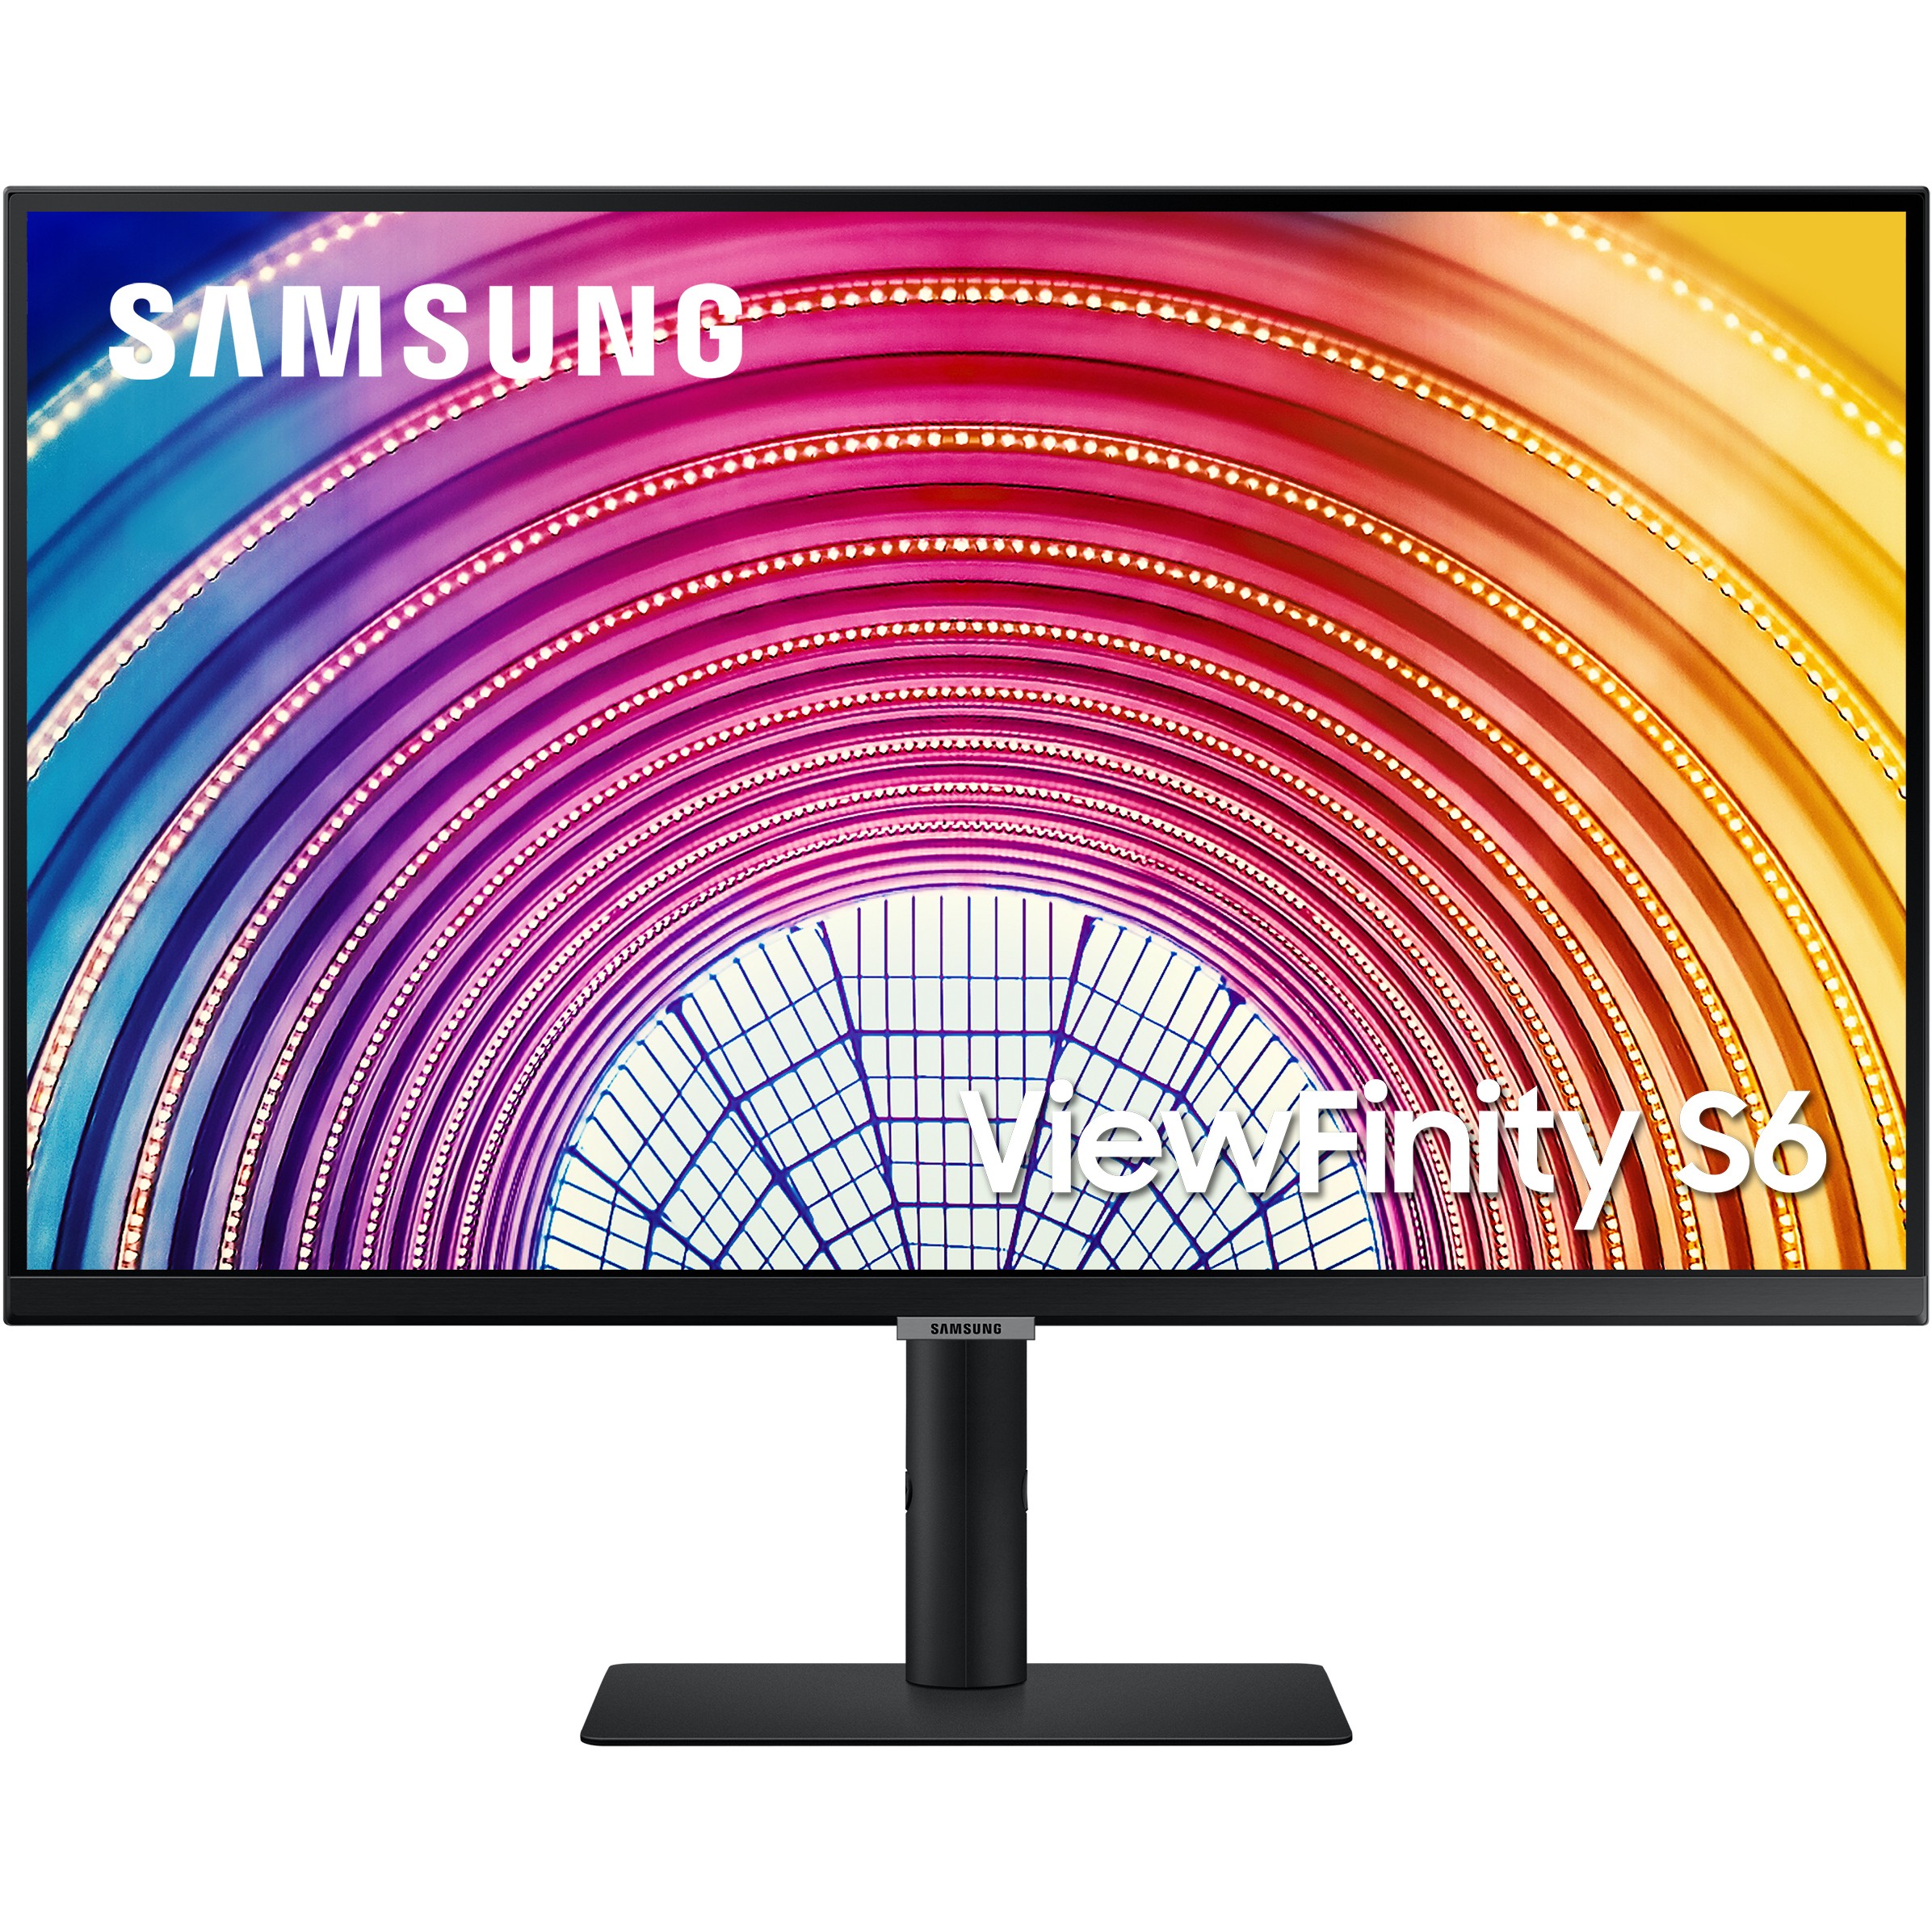 Samsung ViewFinity S60A LED display - LS27A600NAUXEN